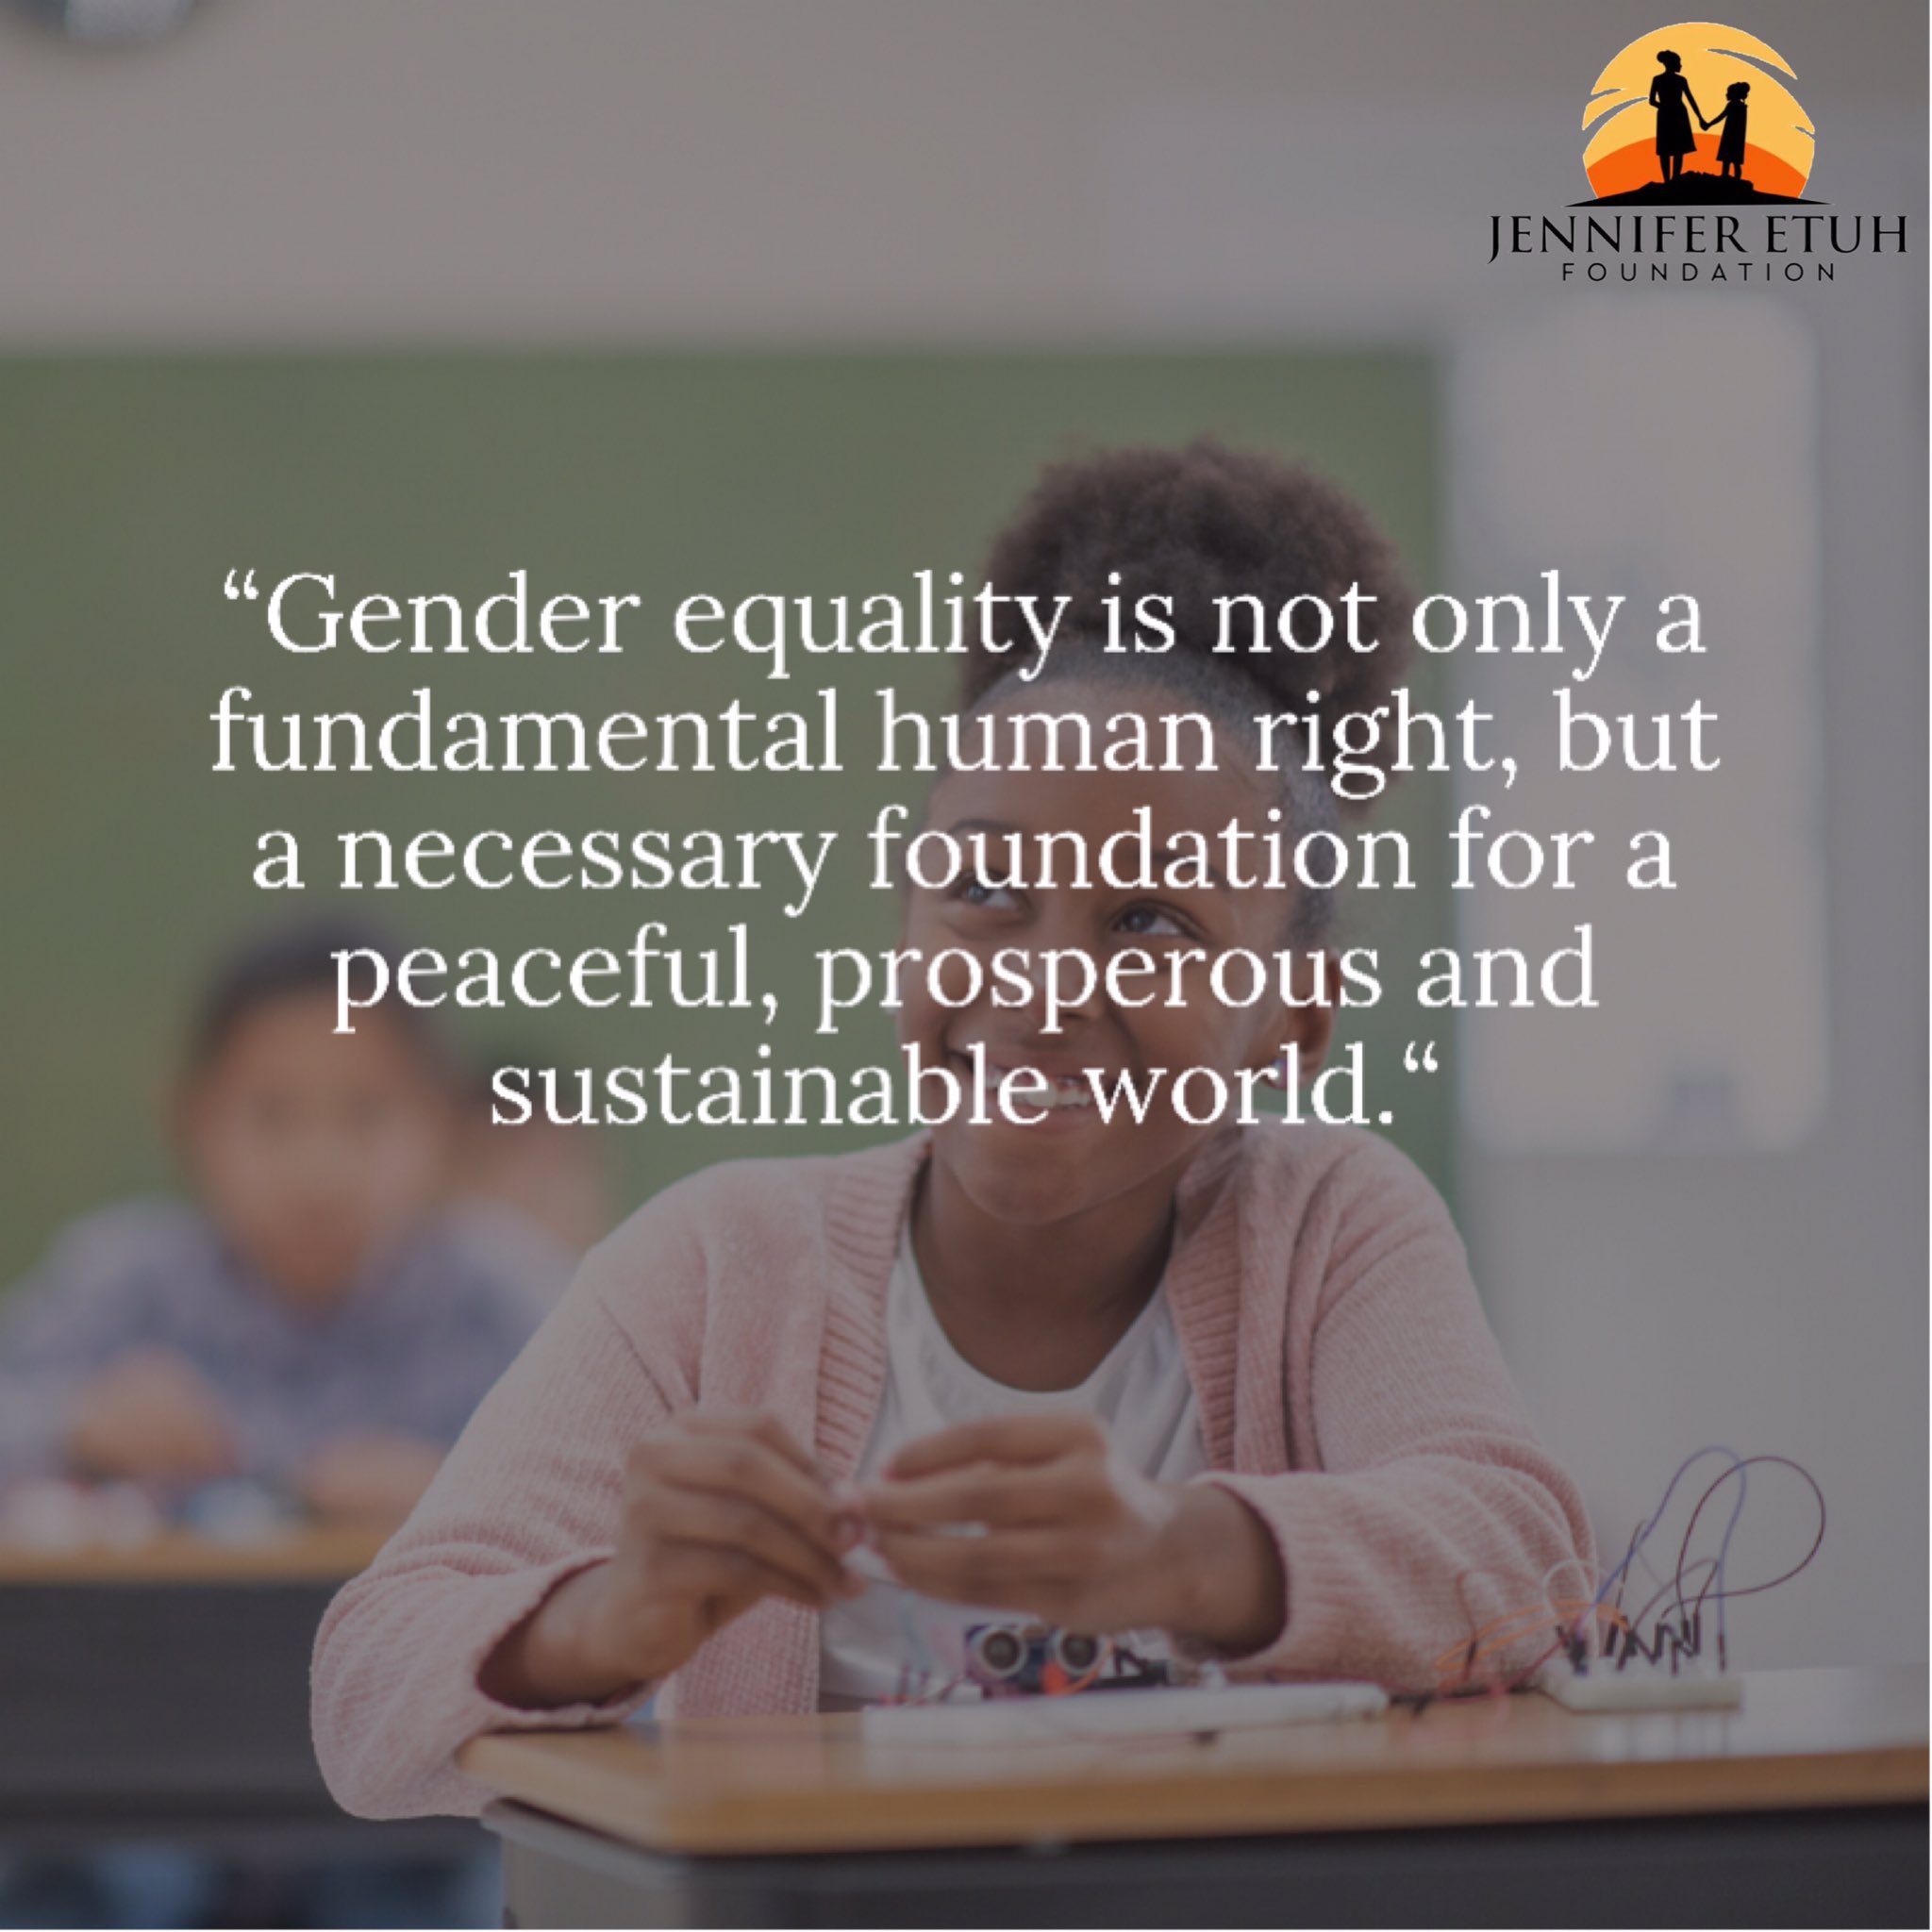 Gender equality centered in human rights is both a development